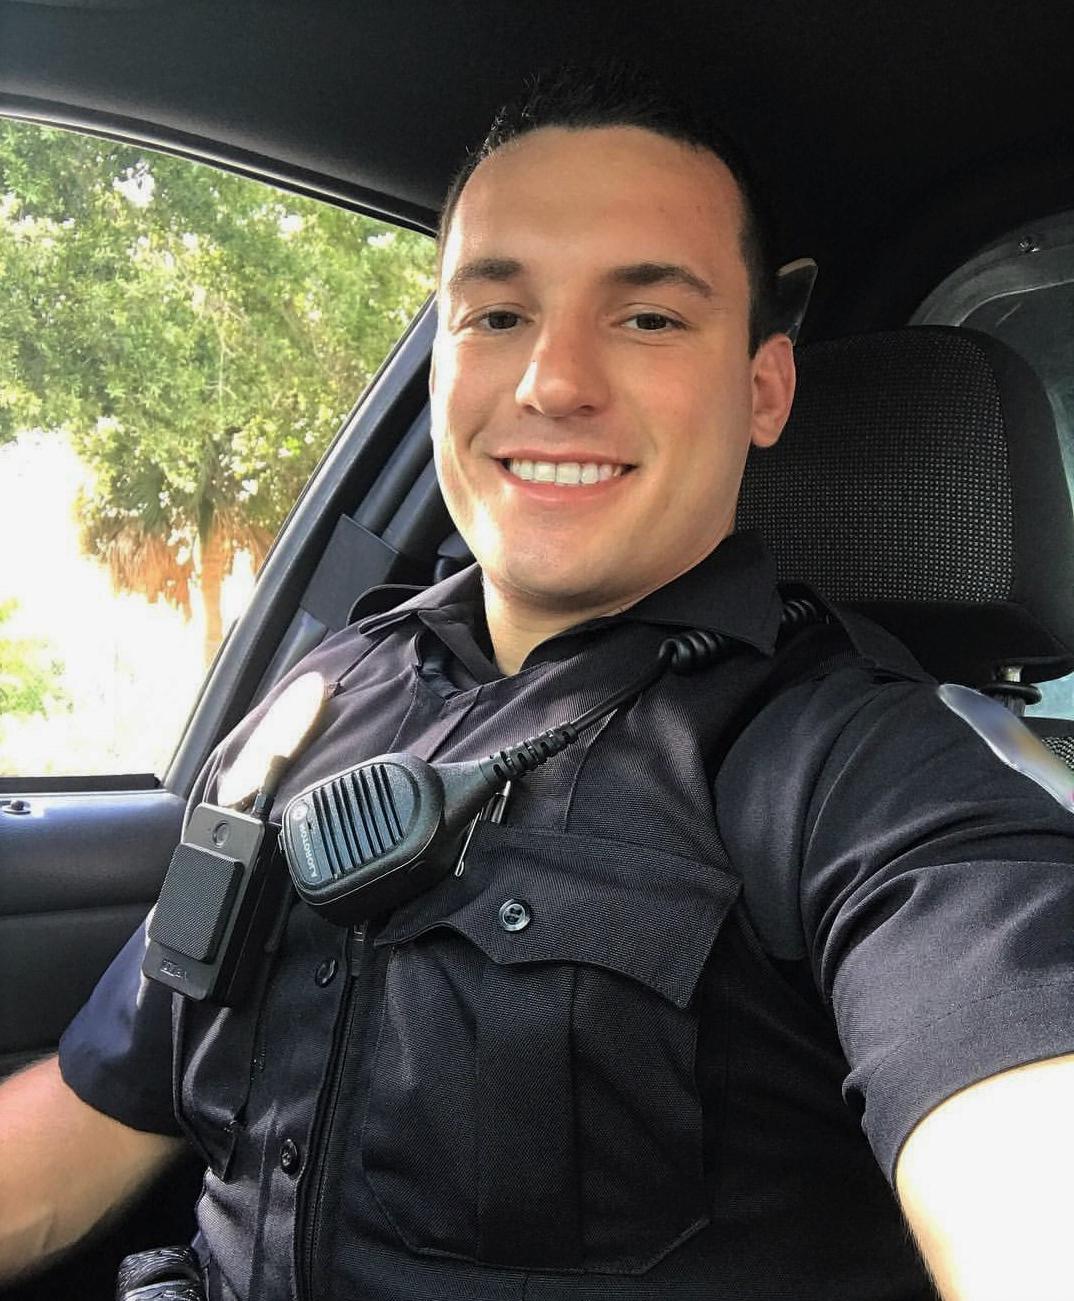 most-adorable-young-policeman-officer-car-selfie-smiling-pretty-face-sexy-local-college-cop-uniform